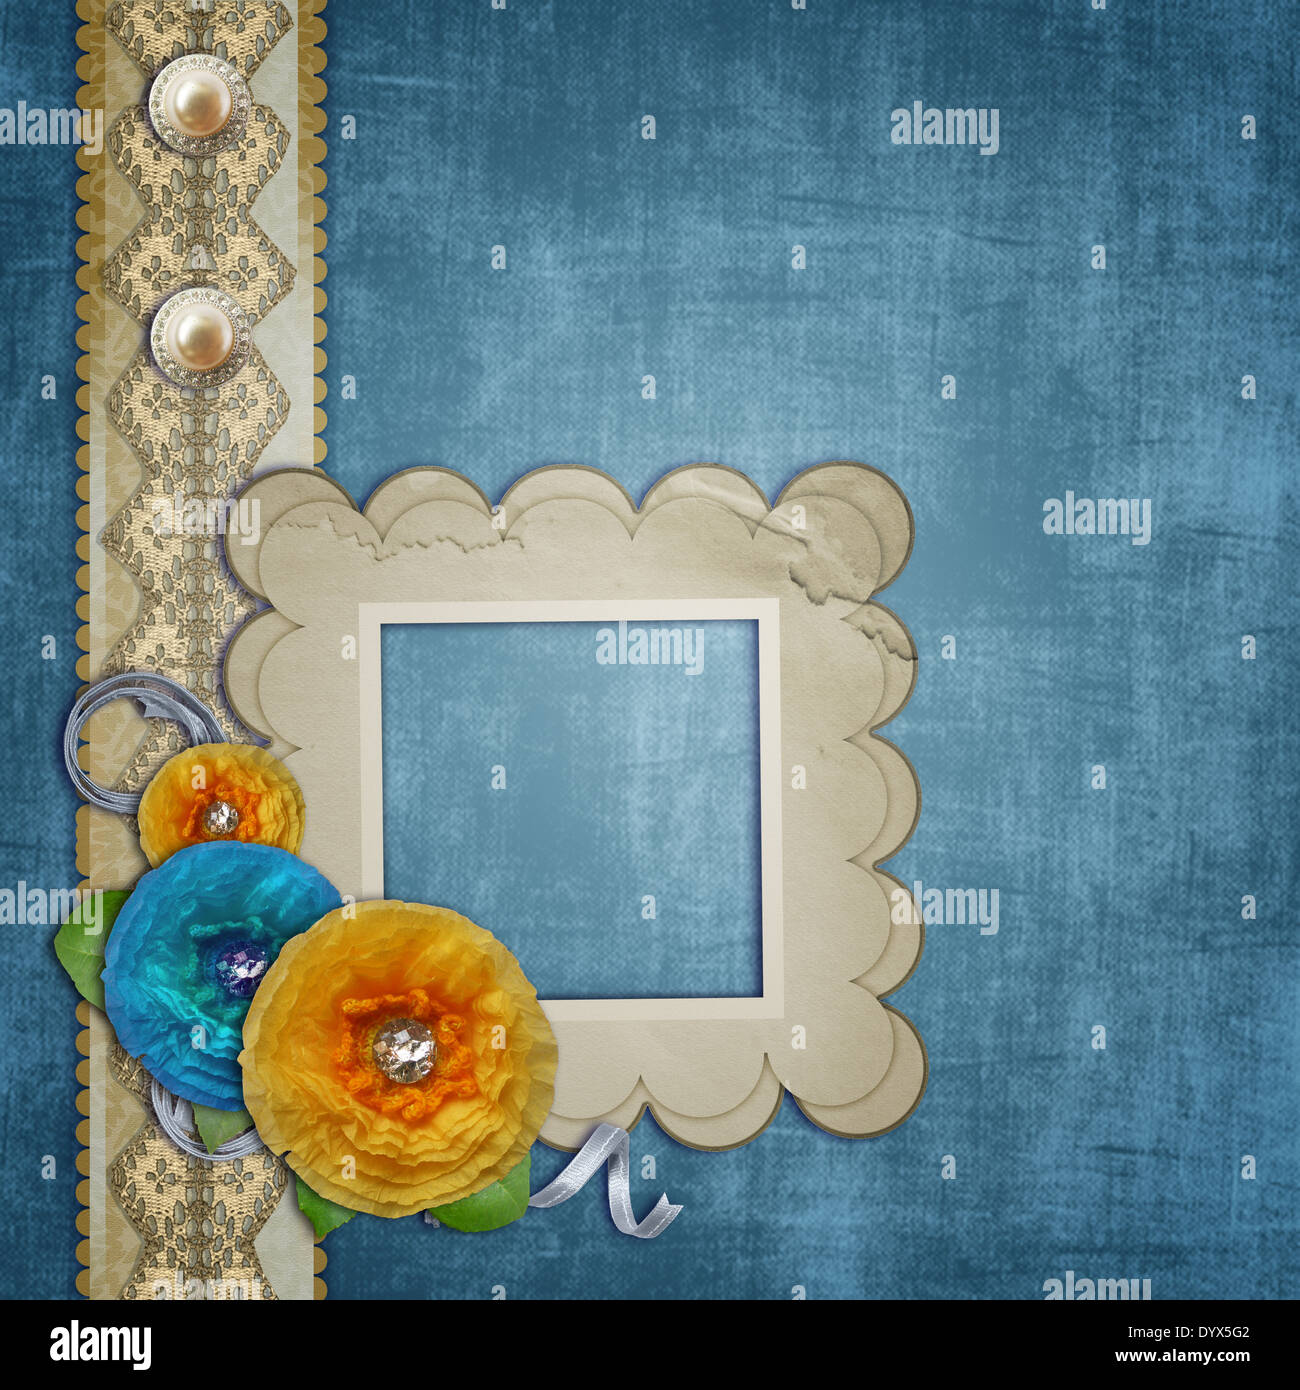 Blue vintage textured background with a bouquet of paper flowers, lace and pearls Stock Photo